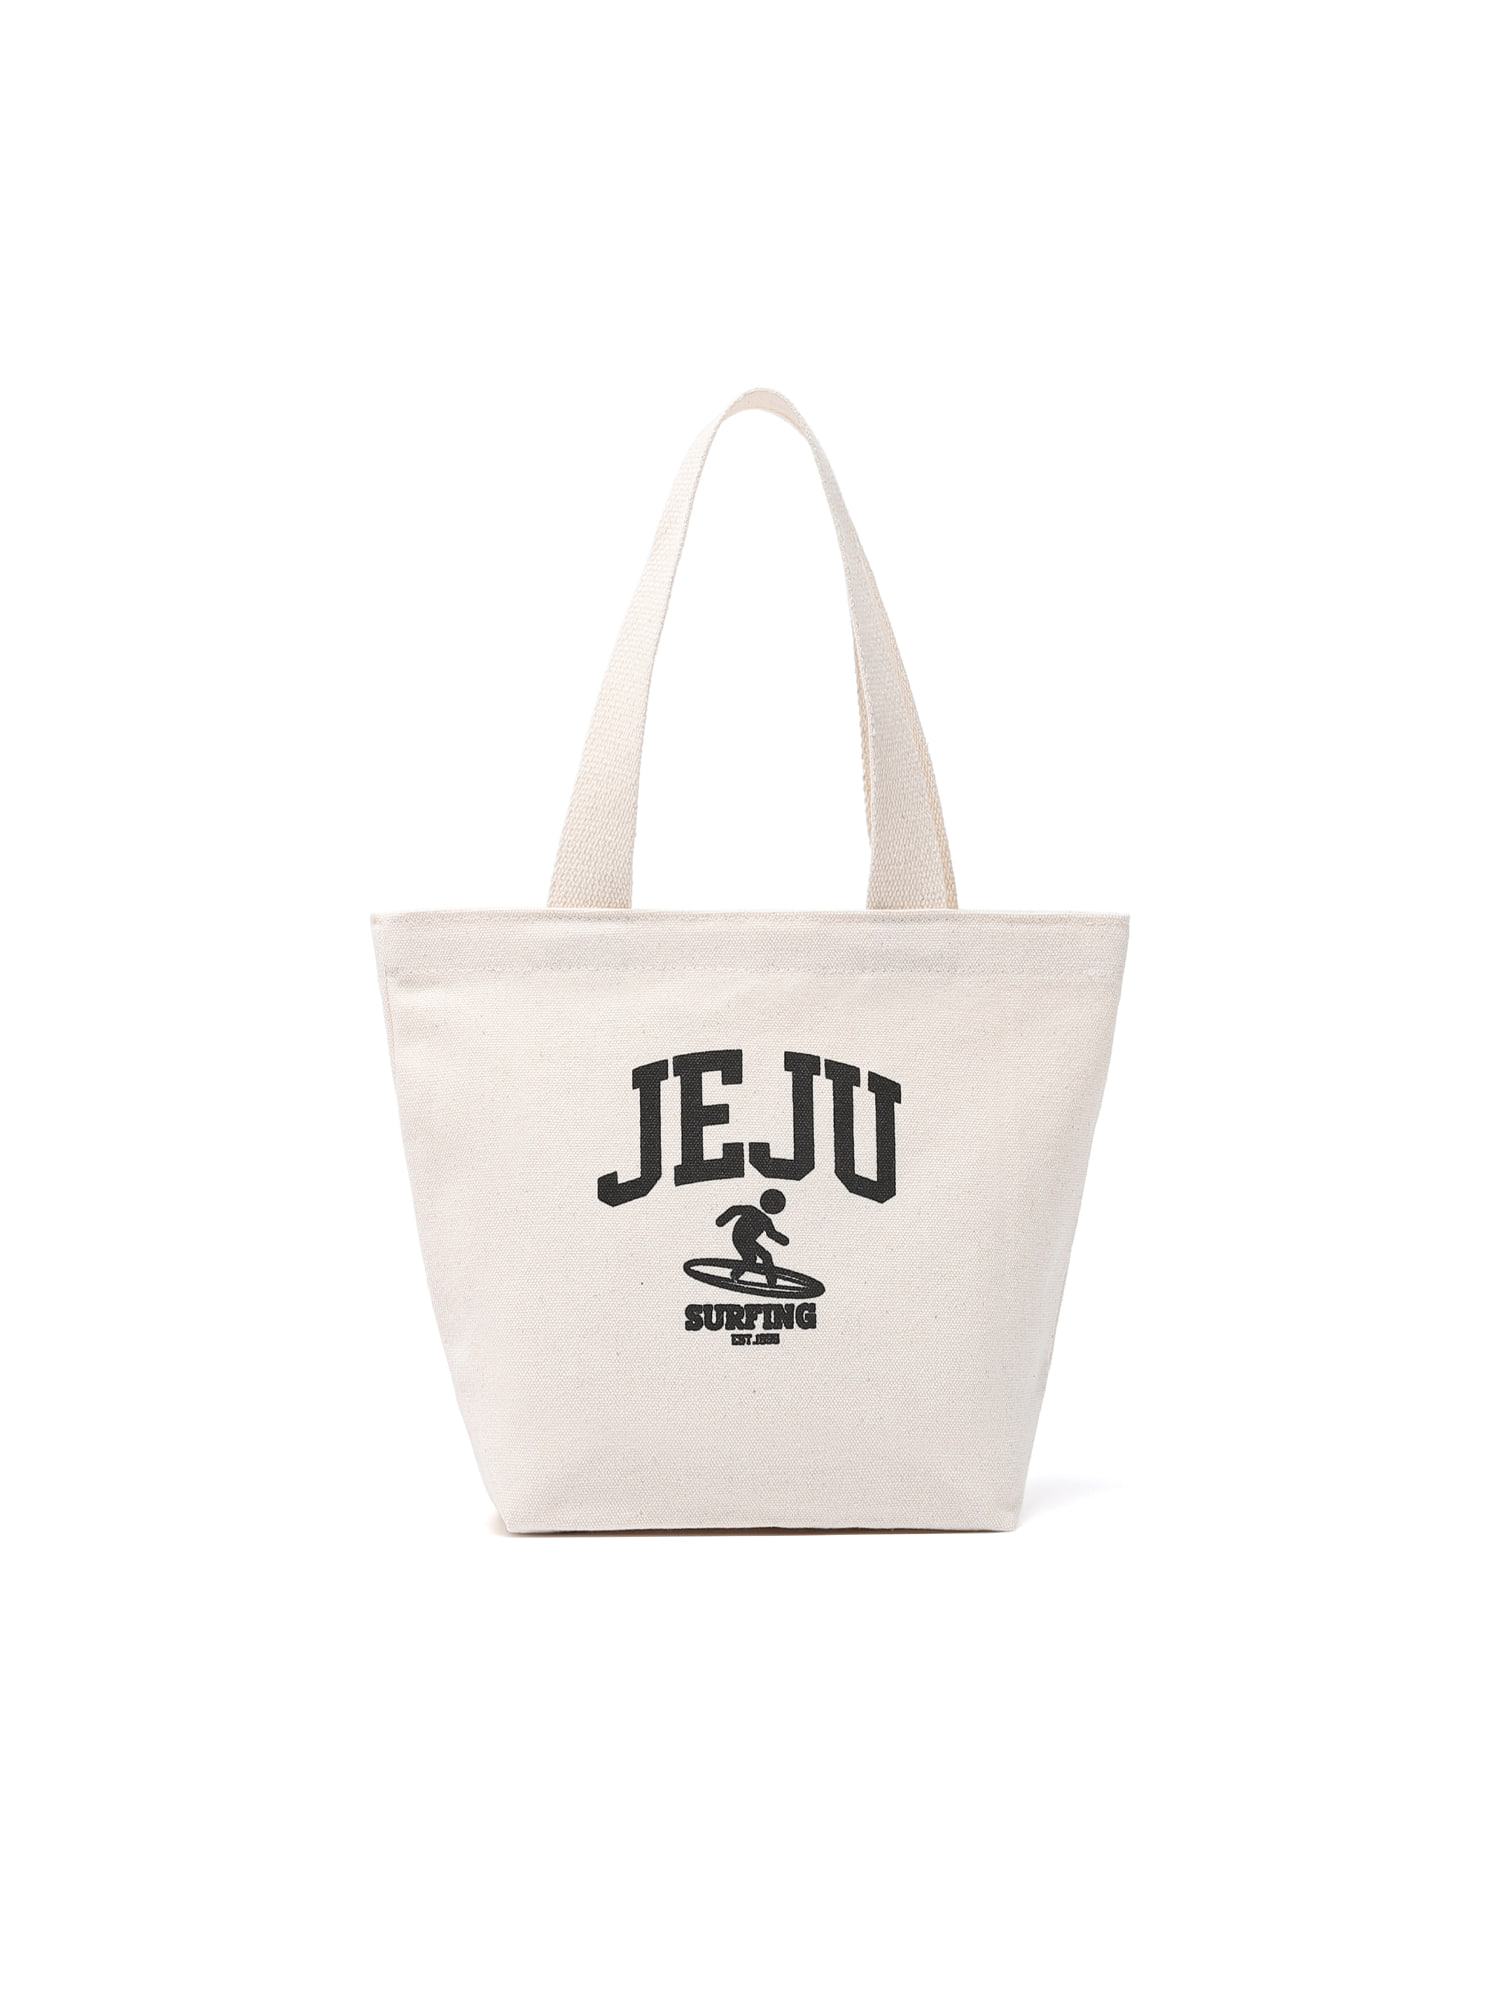 JEJU SURFING SMALL ECOBAG